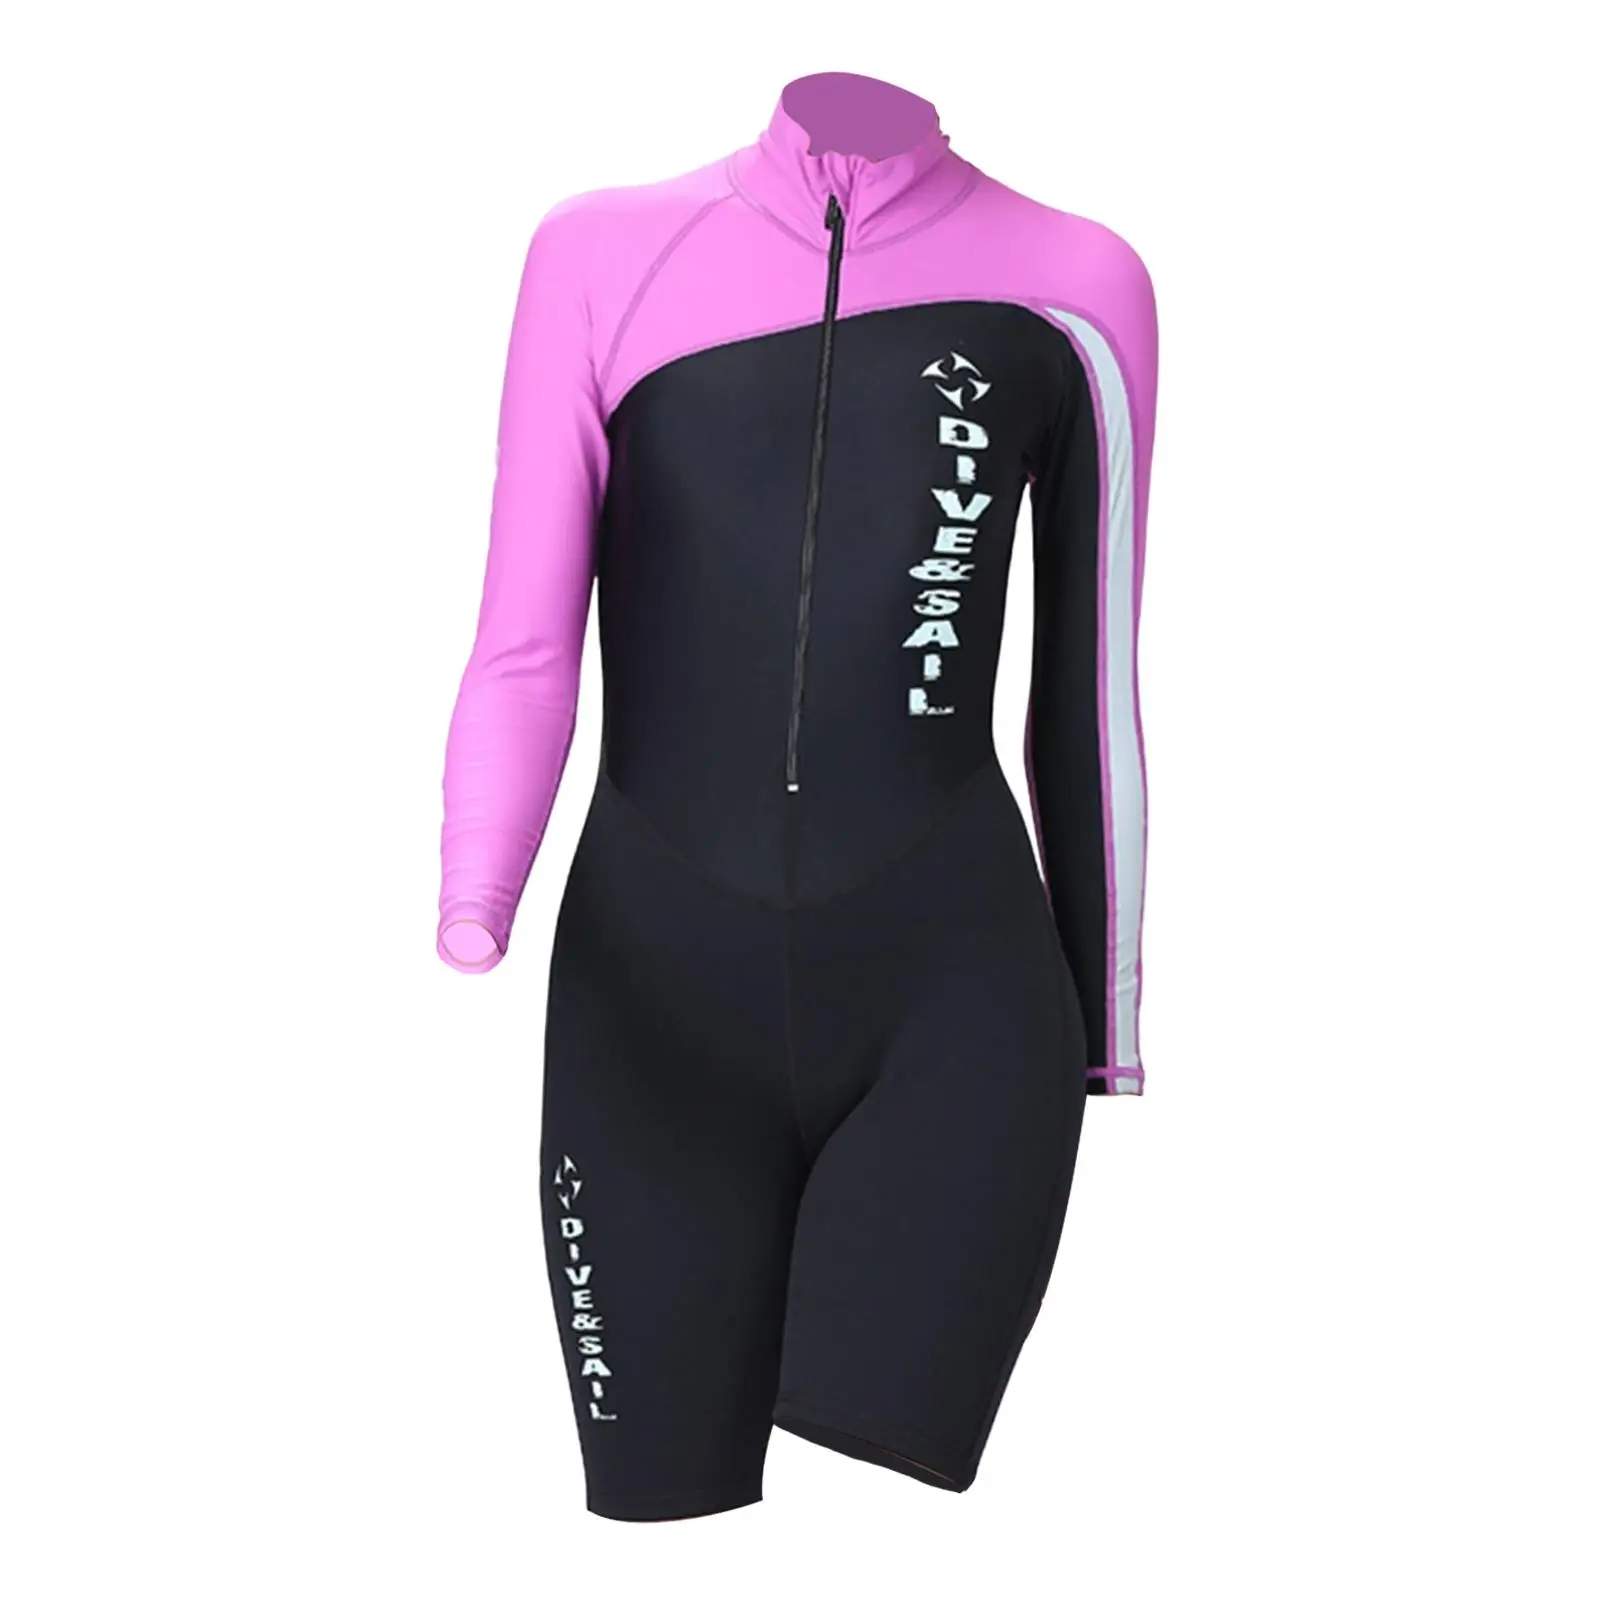 Strech Diving Suit 1.5mm Neoprene Nylon Swimsuit Piece Soft Wetsuits for